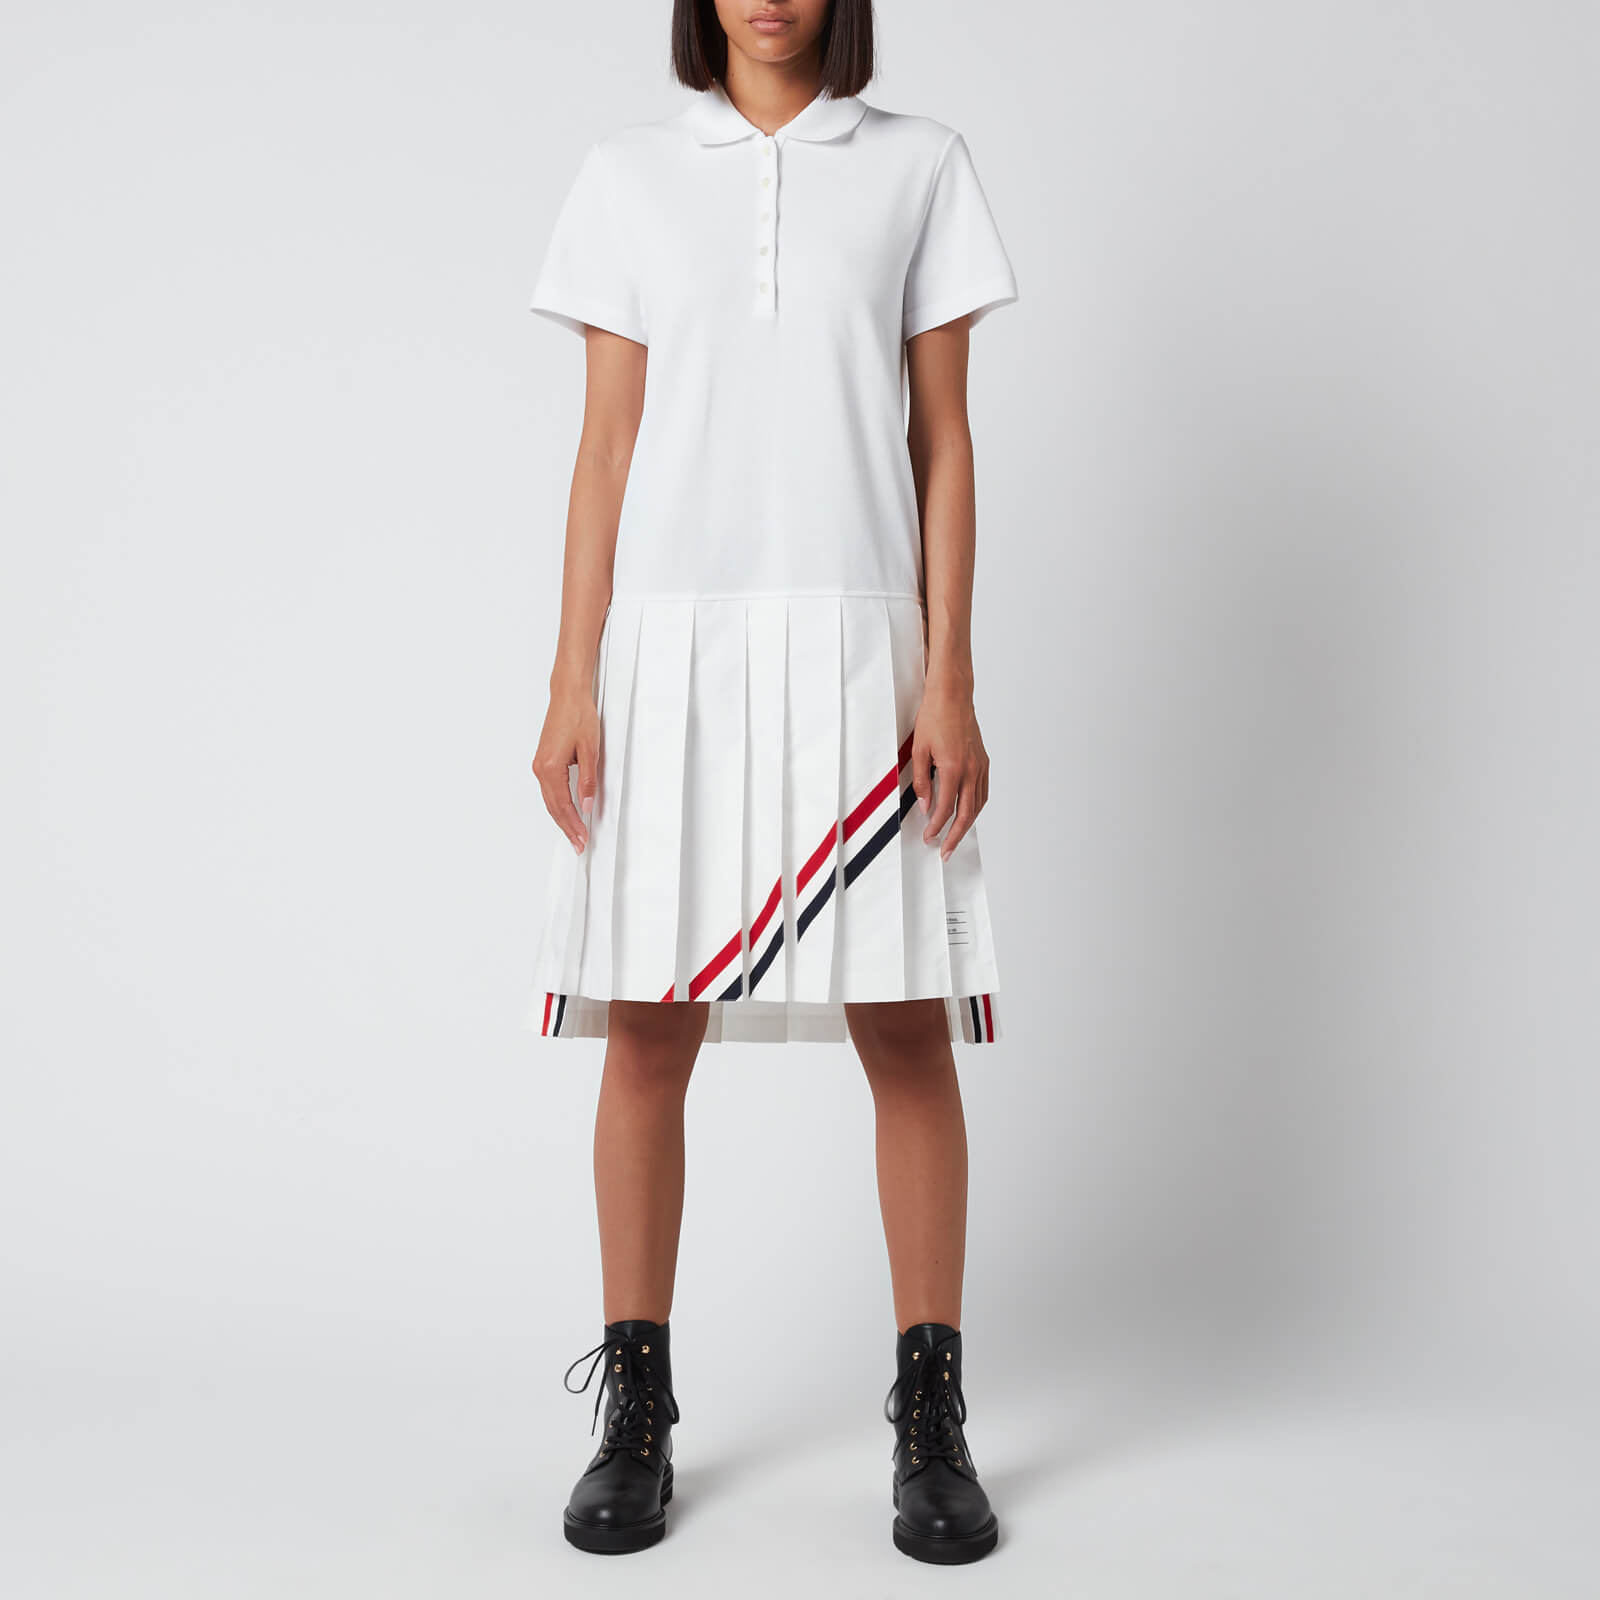 Thom Browne Women's Short Sleeve Pleated Bottom Polo Dress with Diagonal Stripe In Classic Pique - White - IT 38/UK 6